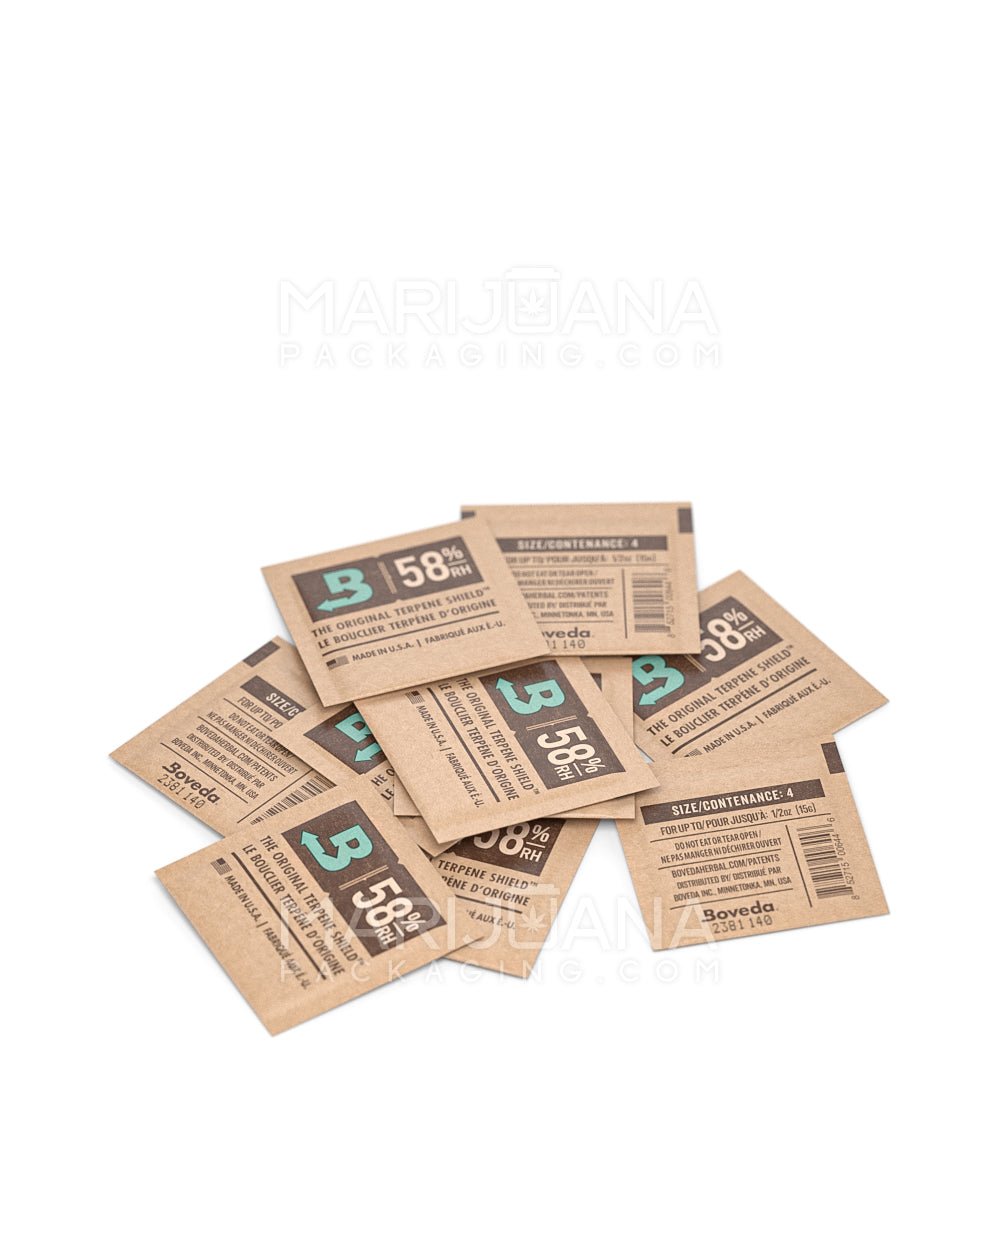 BOVEDA | Humidity Control Packs | 4 Grams - 58% - 100 Count - 7